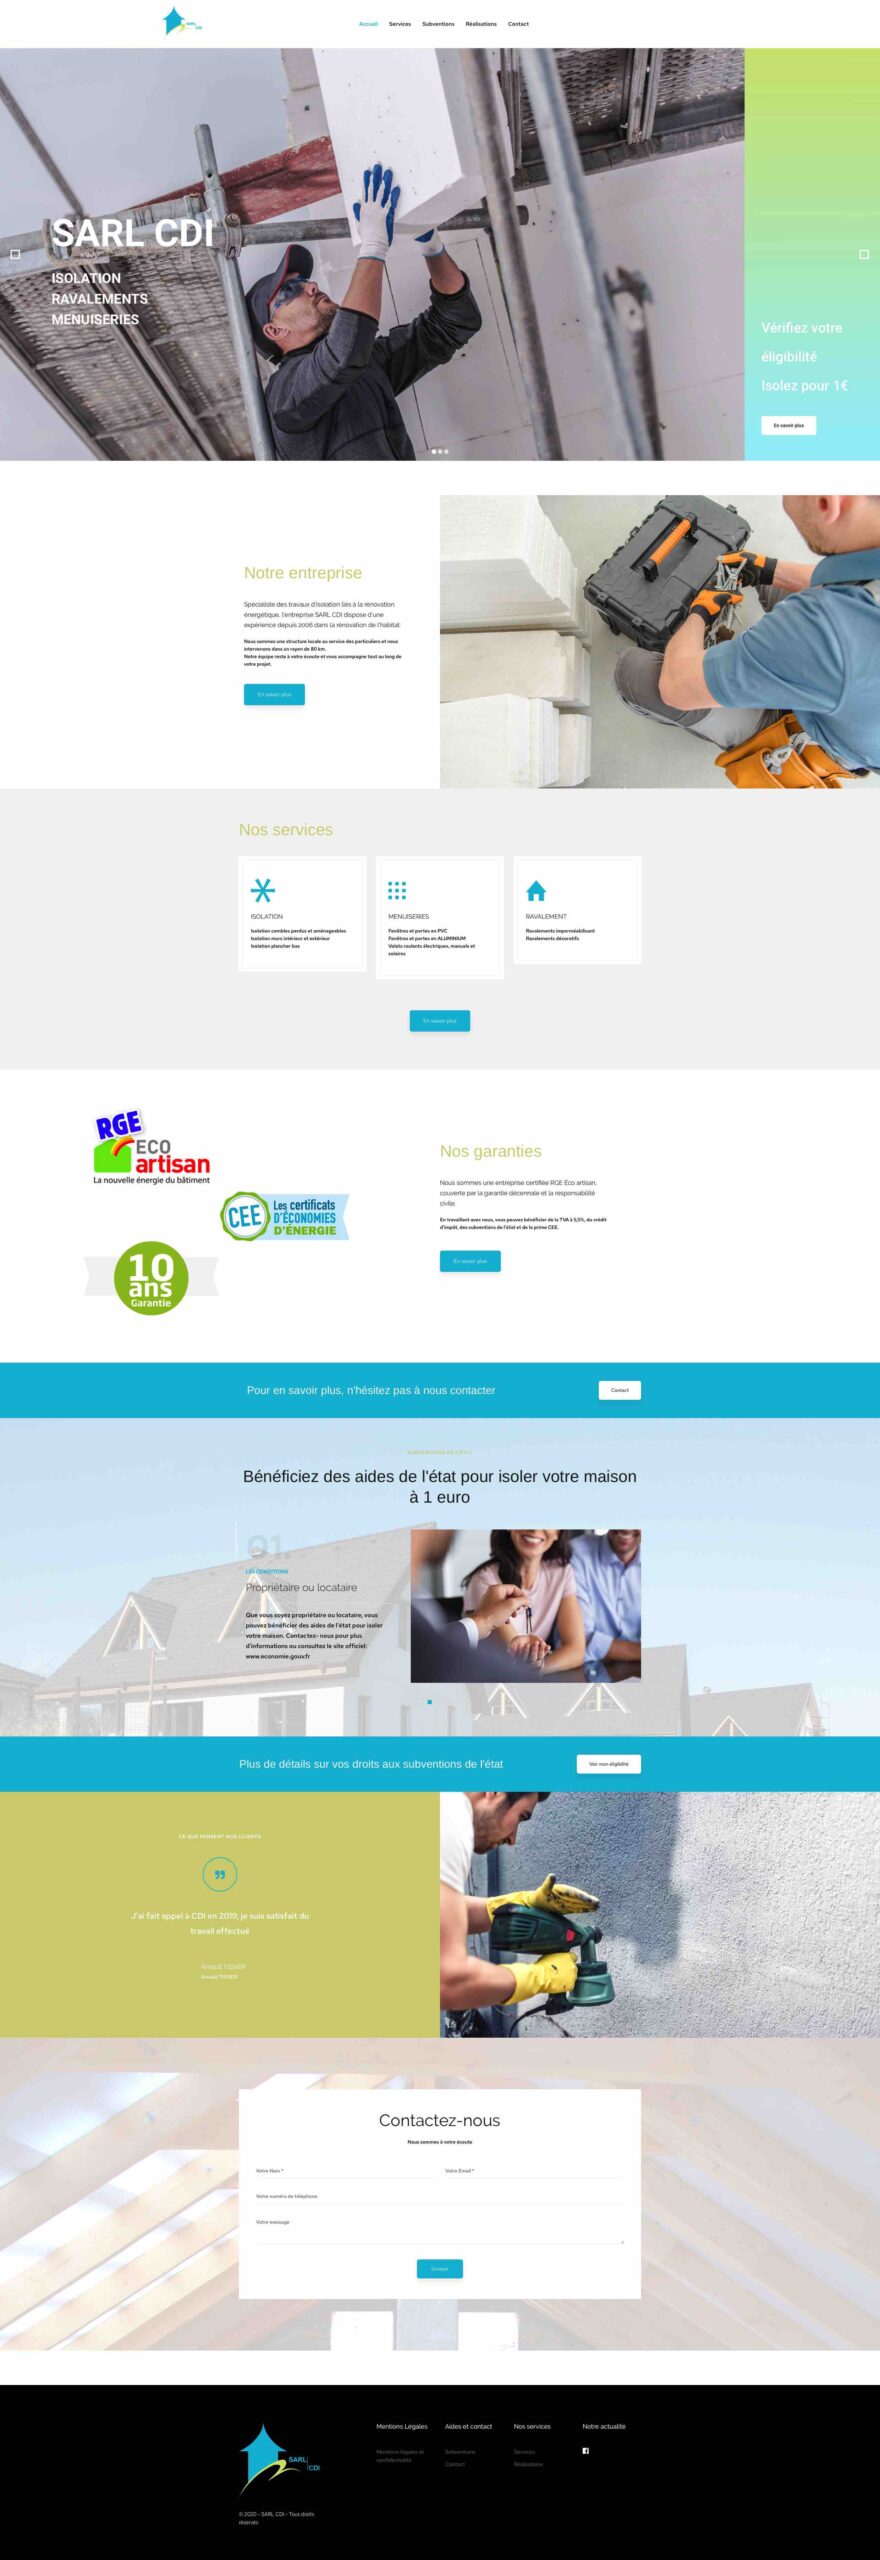 ANGELIQUE DAMOUR - projet SARL CDI - home page full